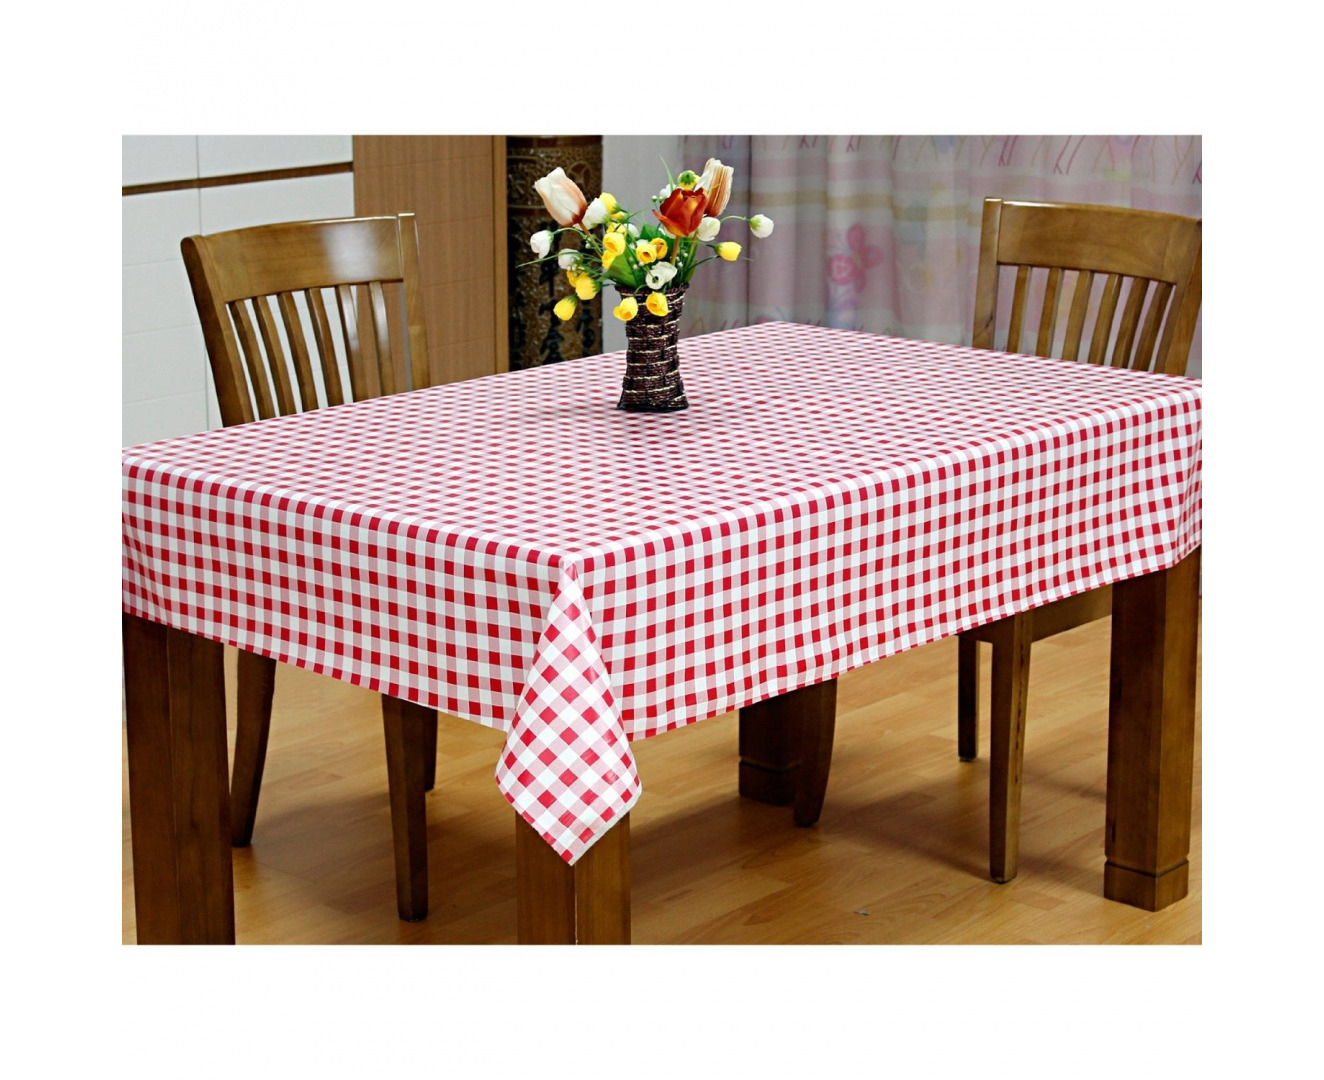 Micro-Pro Silver Star Wipe Clean PVC Vinyl Tablecloth Table Cover Protector 140x240cm 